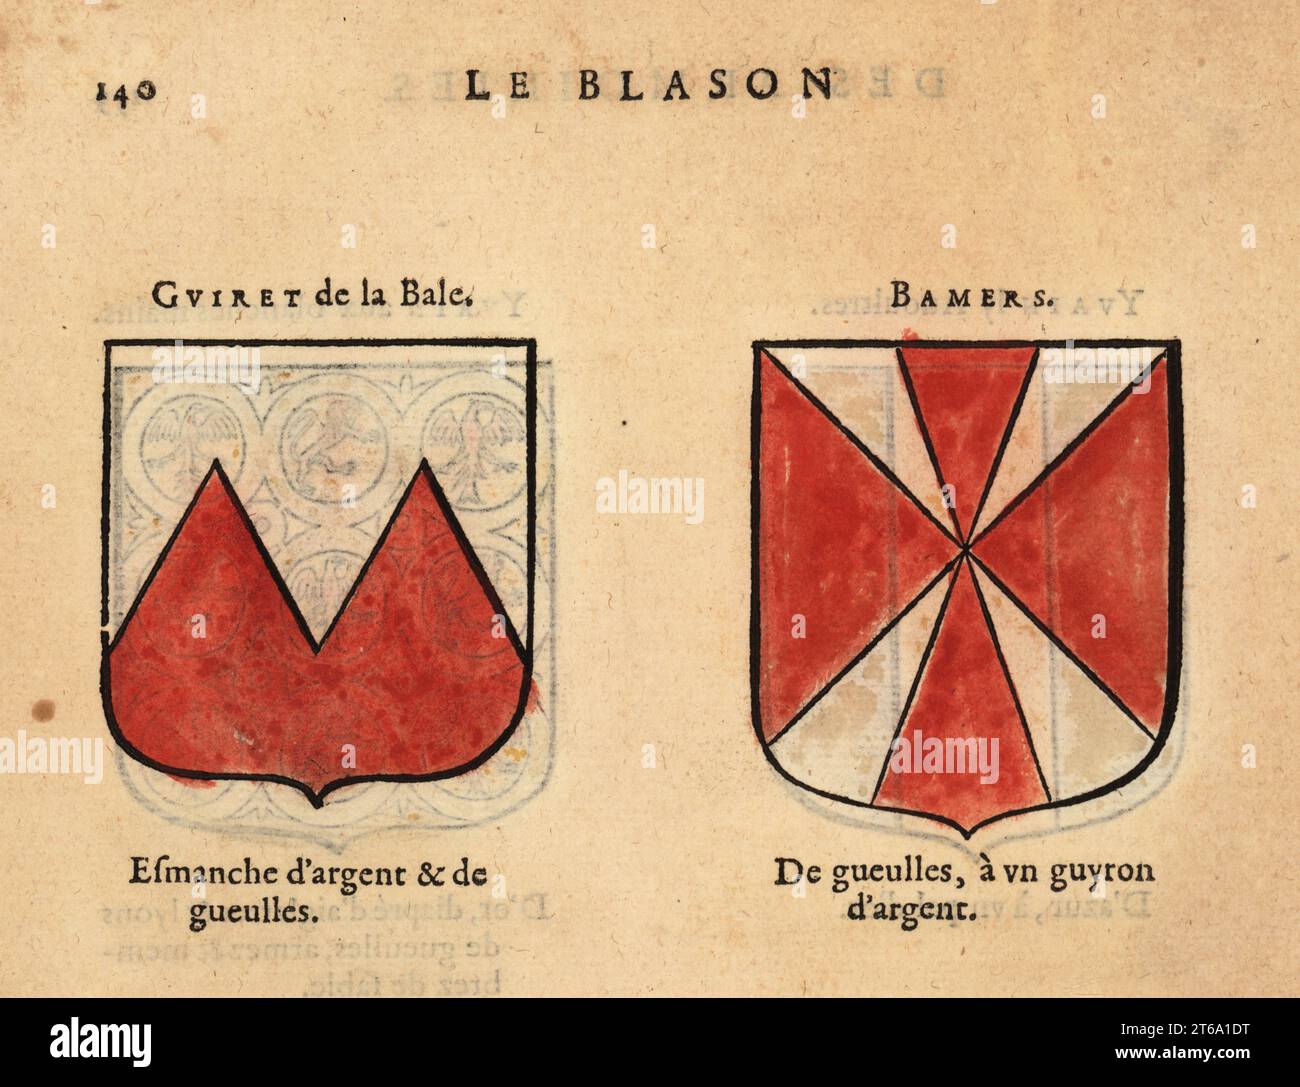 Imaginary coats of arms of King Arthurs Knights of the Round Table: Guivret the Small with silver and red and Banyer., Chevaliers de la table ronde: Guiret de la Bale, Bamers. Handcoloured woodblock engraving from Hierosme de Baras Le Blason des Armoiries, Chez Rolet Boutonne, Paris, 1628. Stock Photo